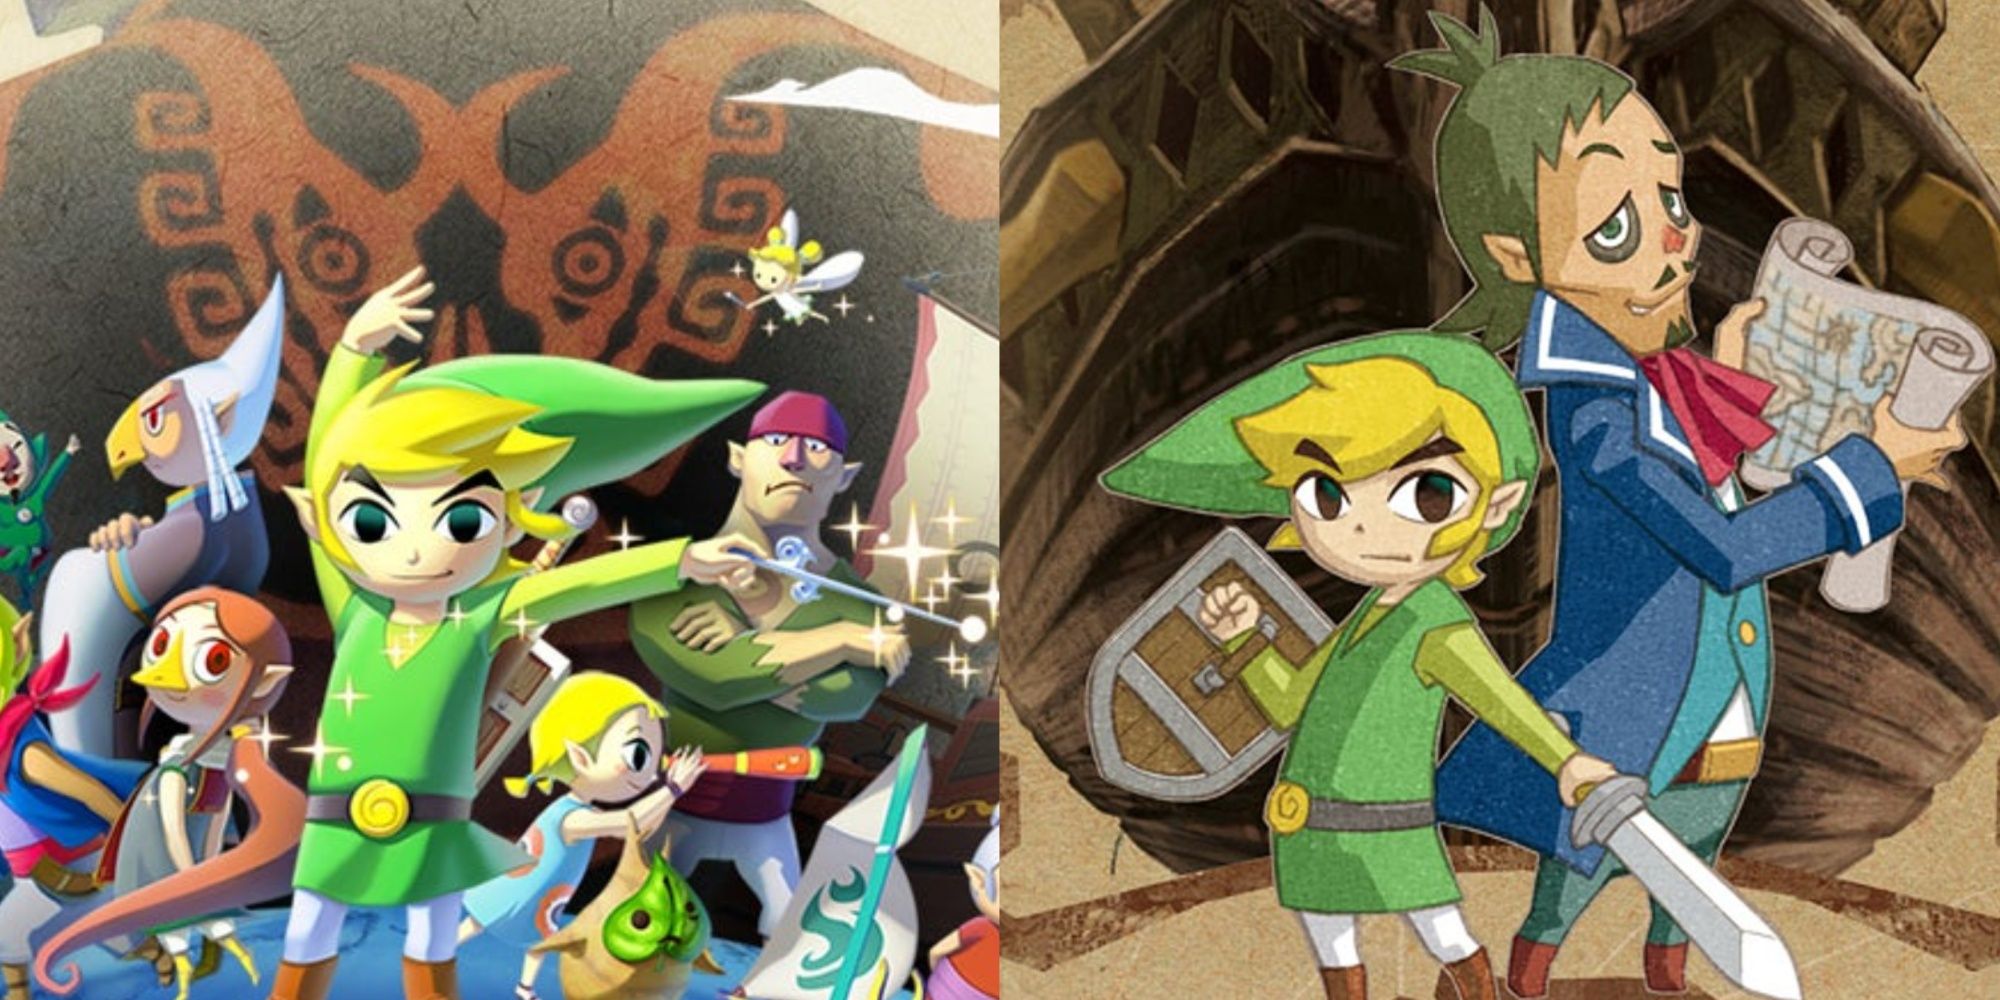 Split image of official art showing Link and supporting characters in The Wind Waker and Link and Linebeck in Phantom Hourglass